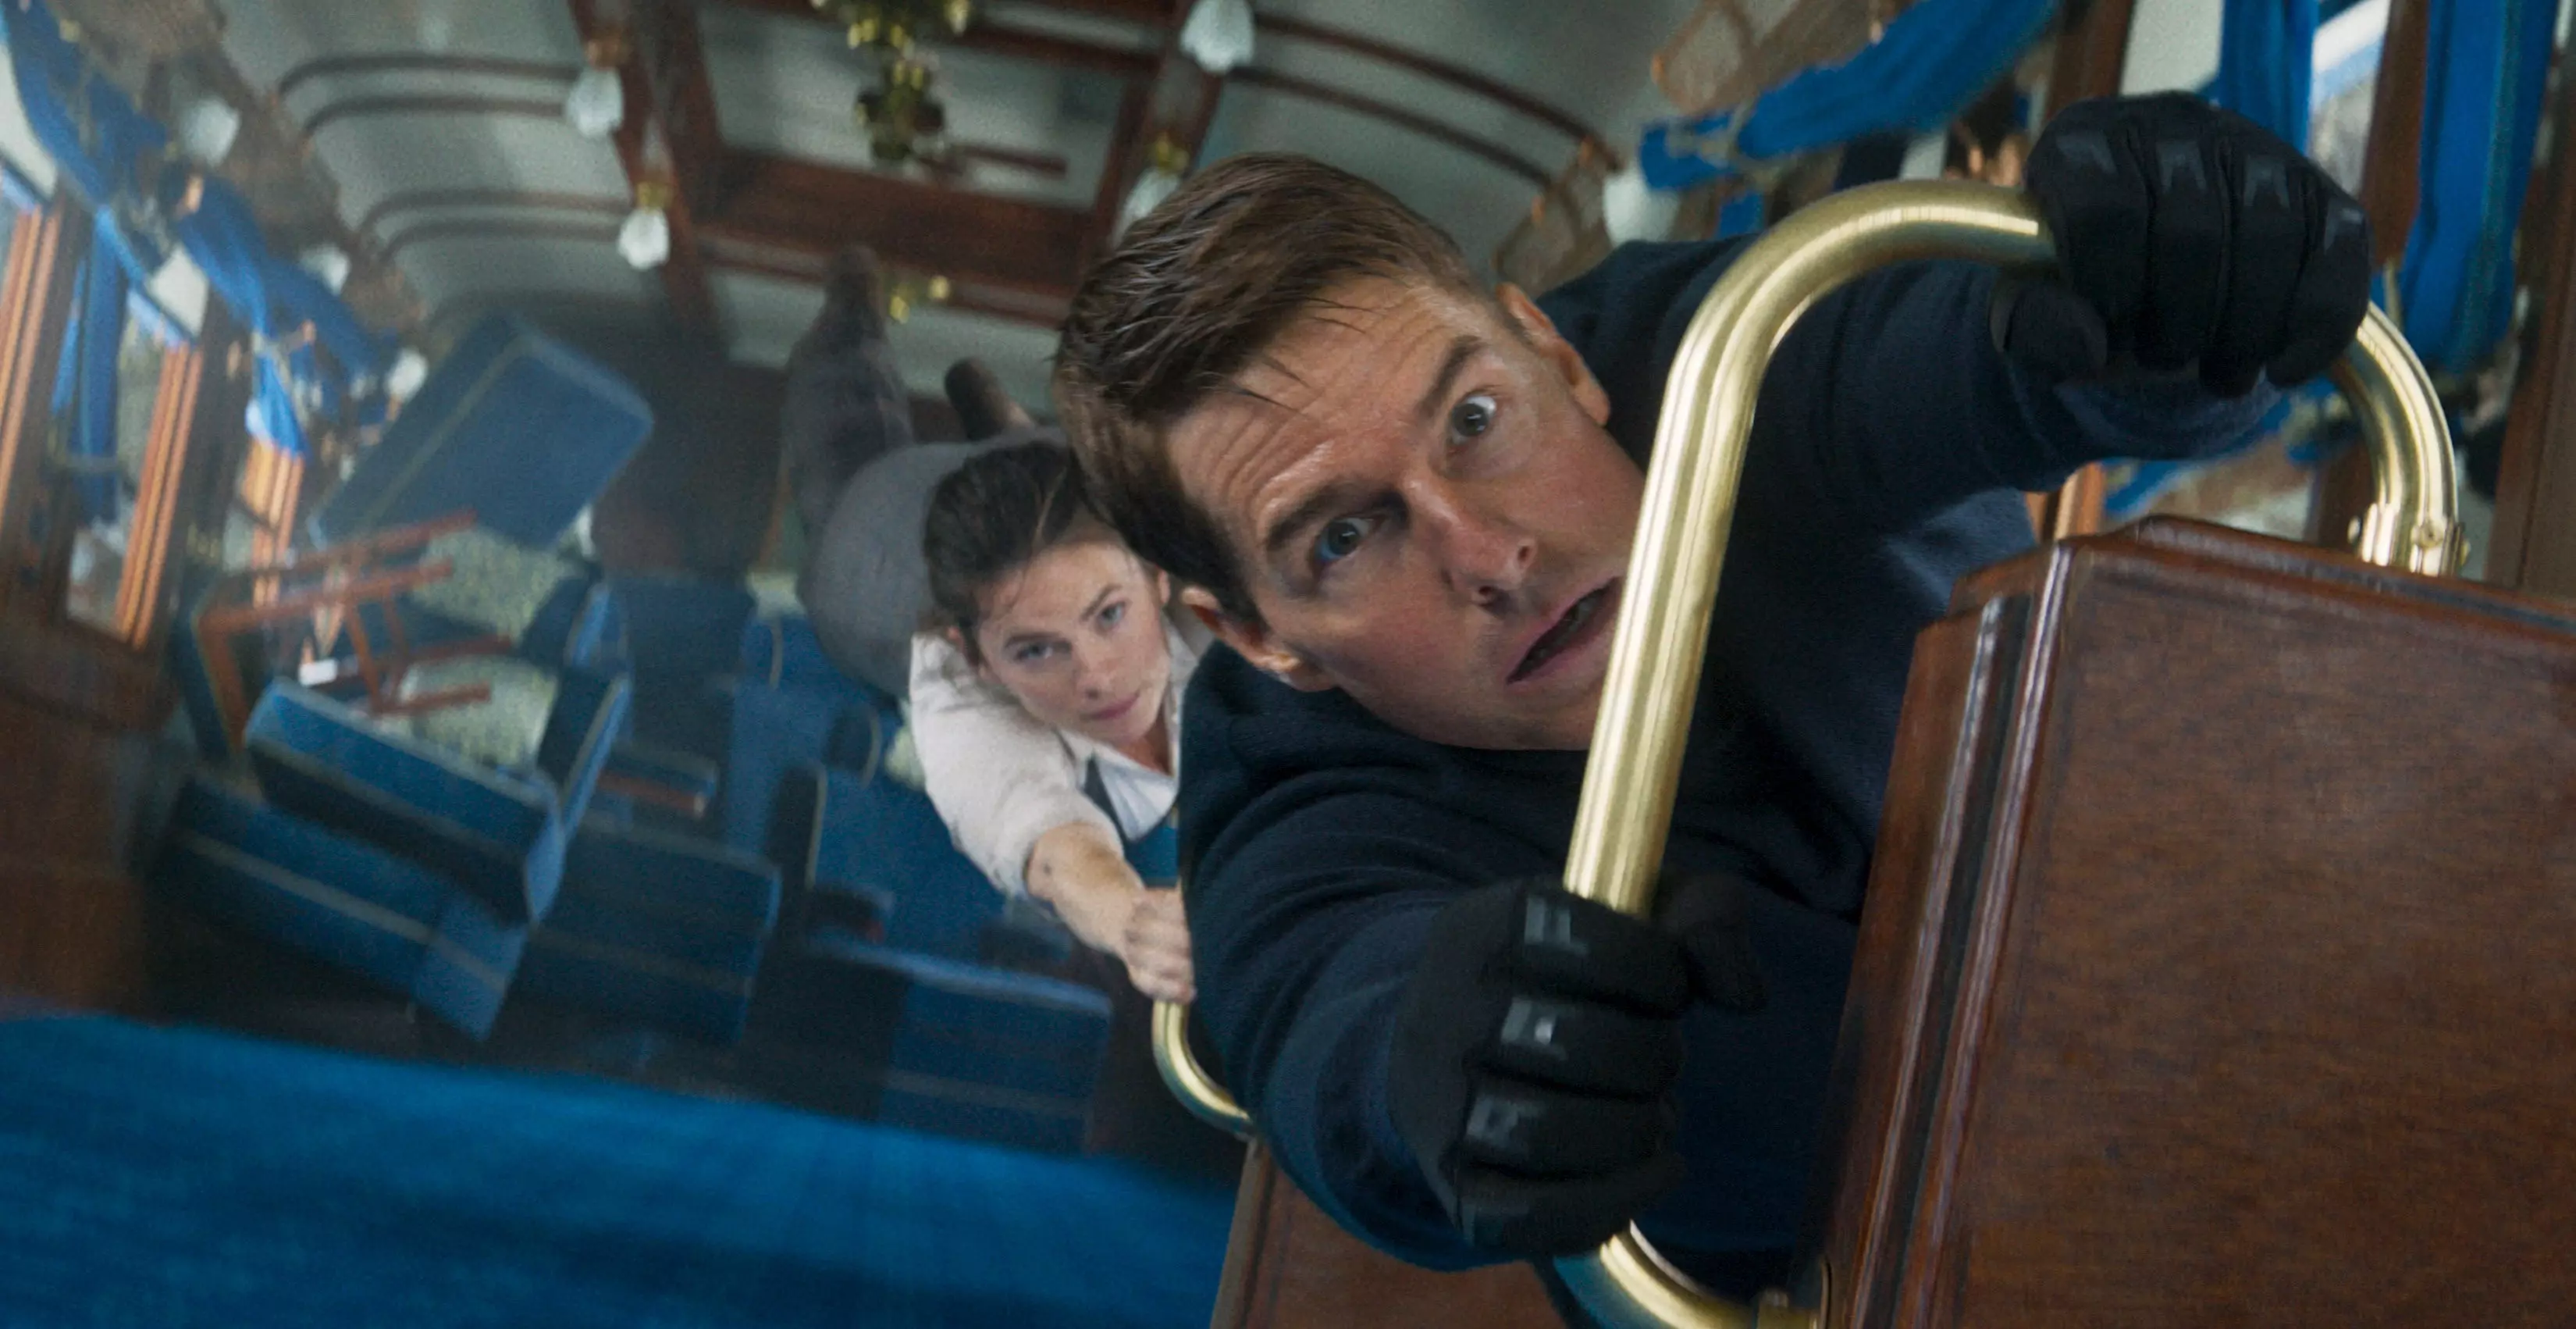 Secret agent Ethan Hunt (Tom Cruise) and the mysterious thief Grace (Hayley Atwell) try to survive a trip on the Orient Express in the action movie "Mission: Impossible - Dead Reckoning Part One."